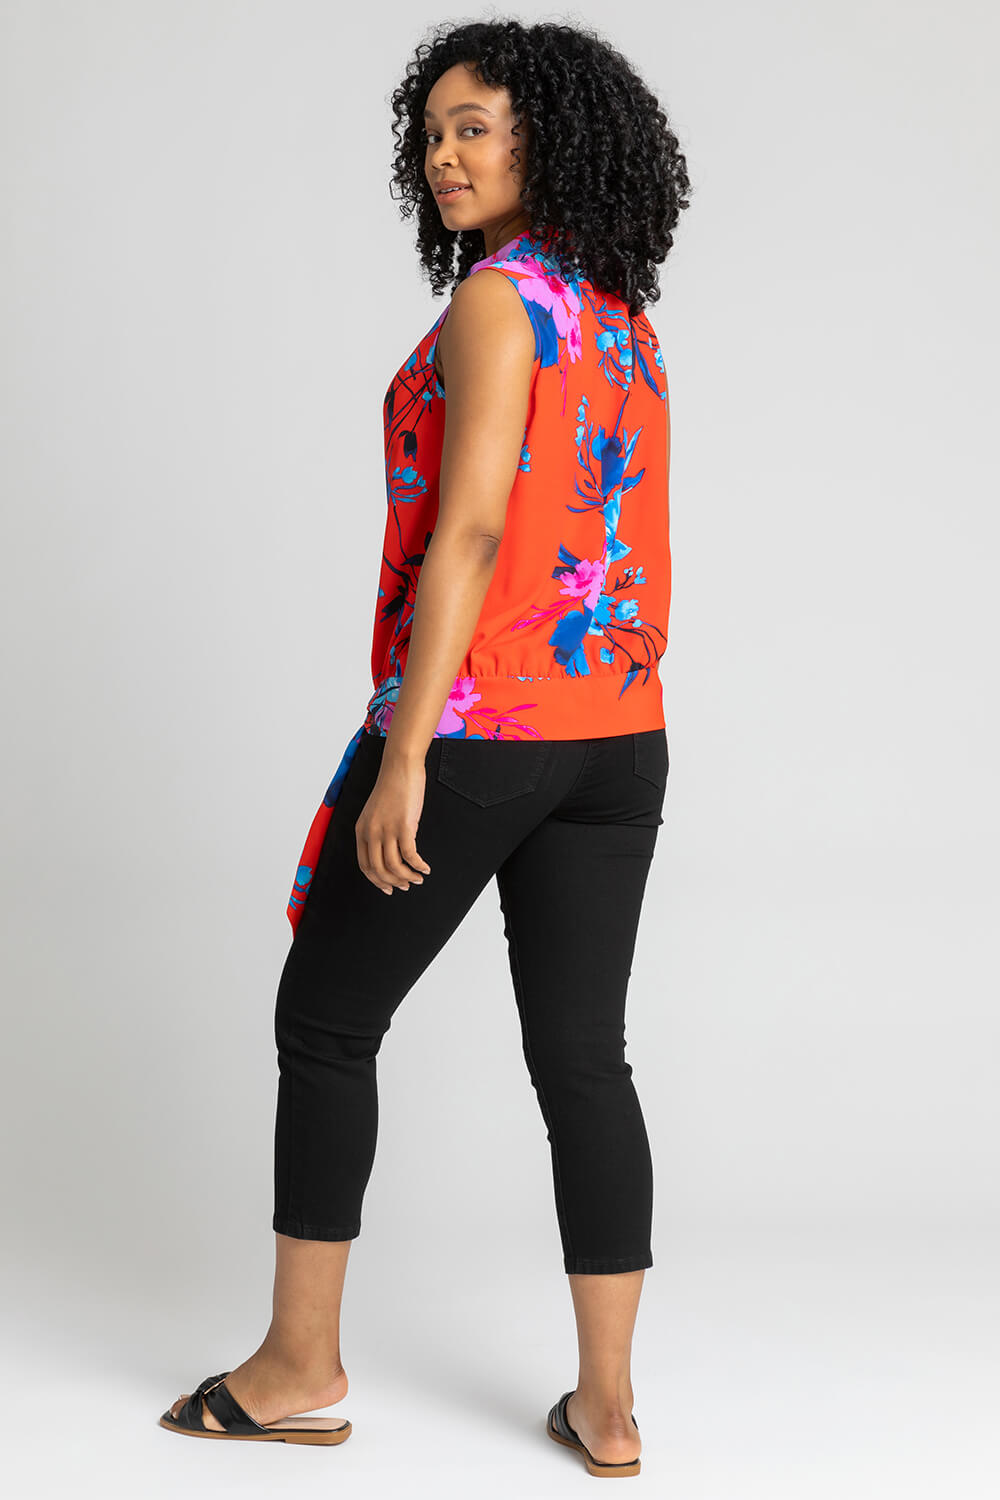 Red Petite Floral Print High Neck Tie Top, Image 2 of 4